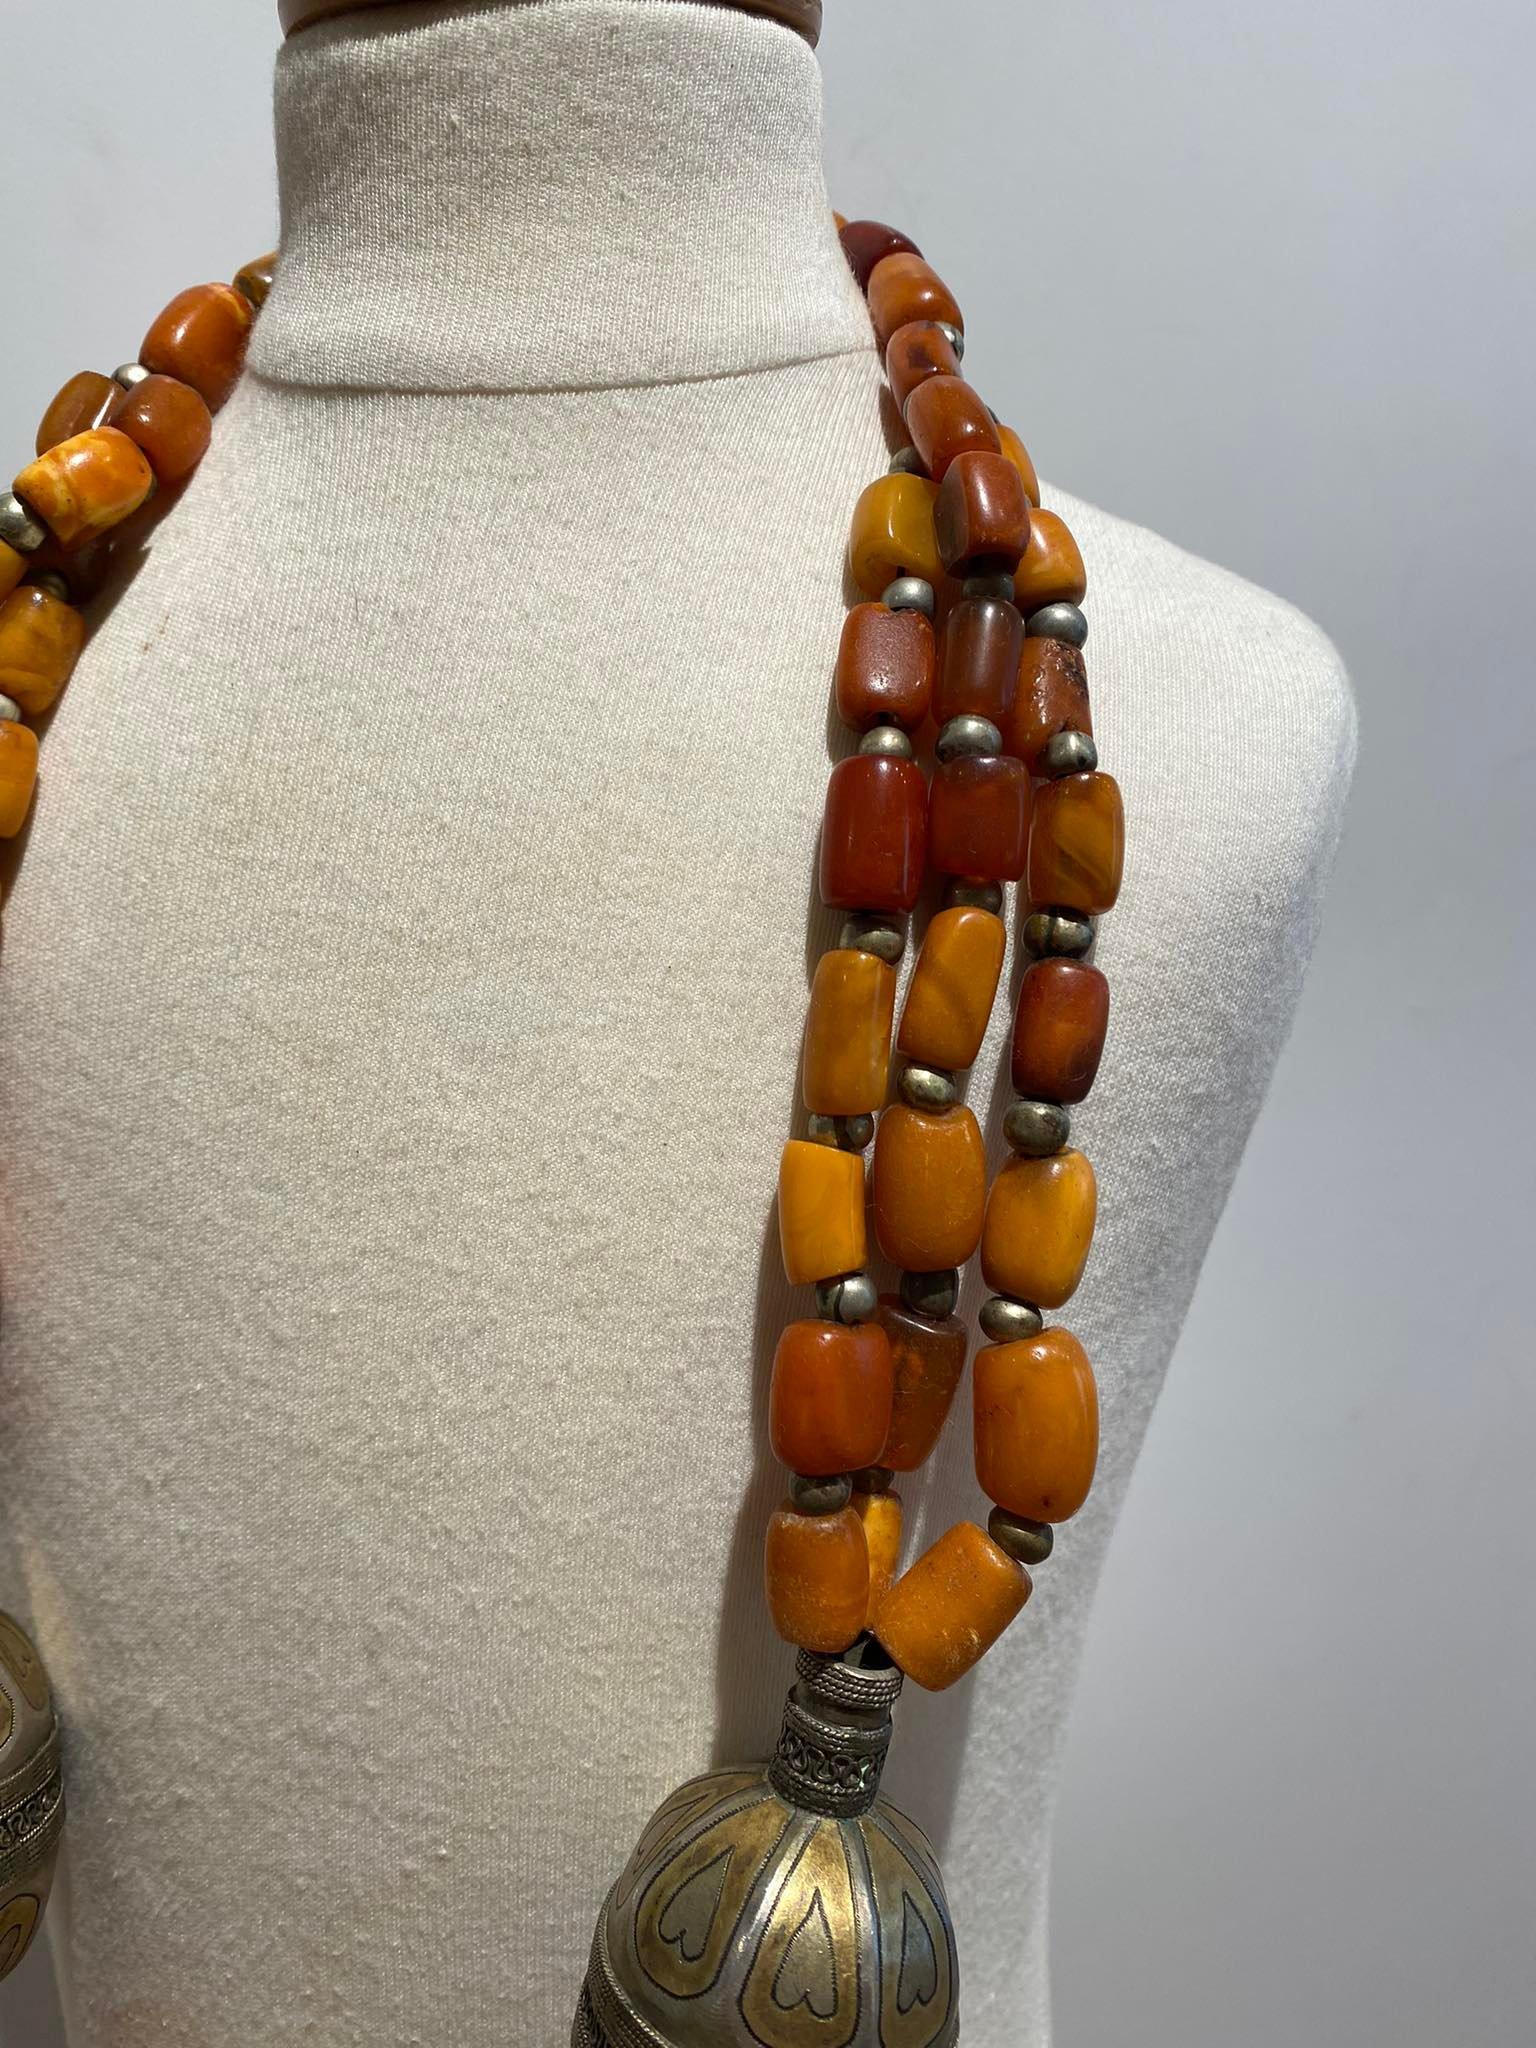  Antique Amber Necklace Yemen Afghanistan 18/19th Century Islamic Art silver  For Sale 13